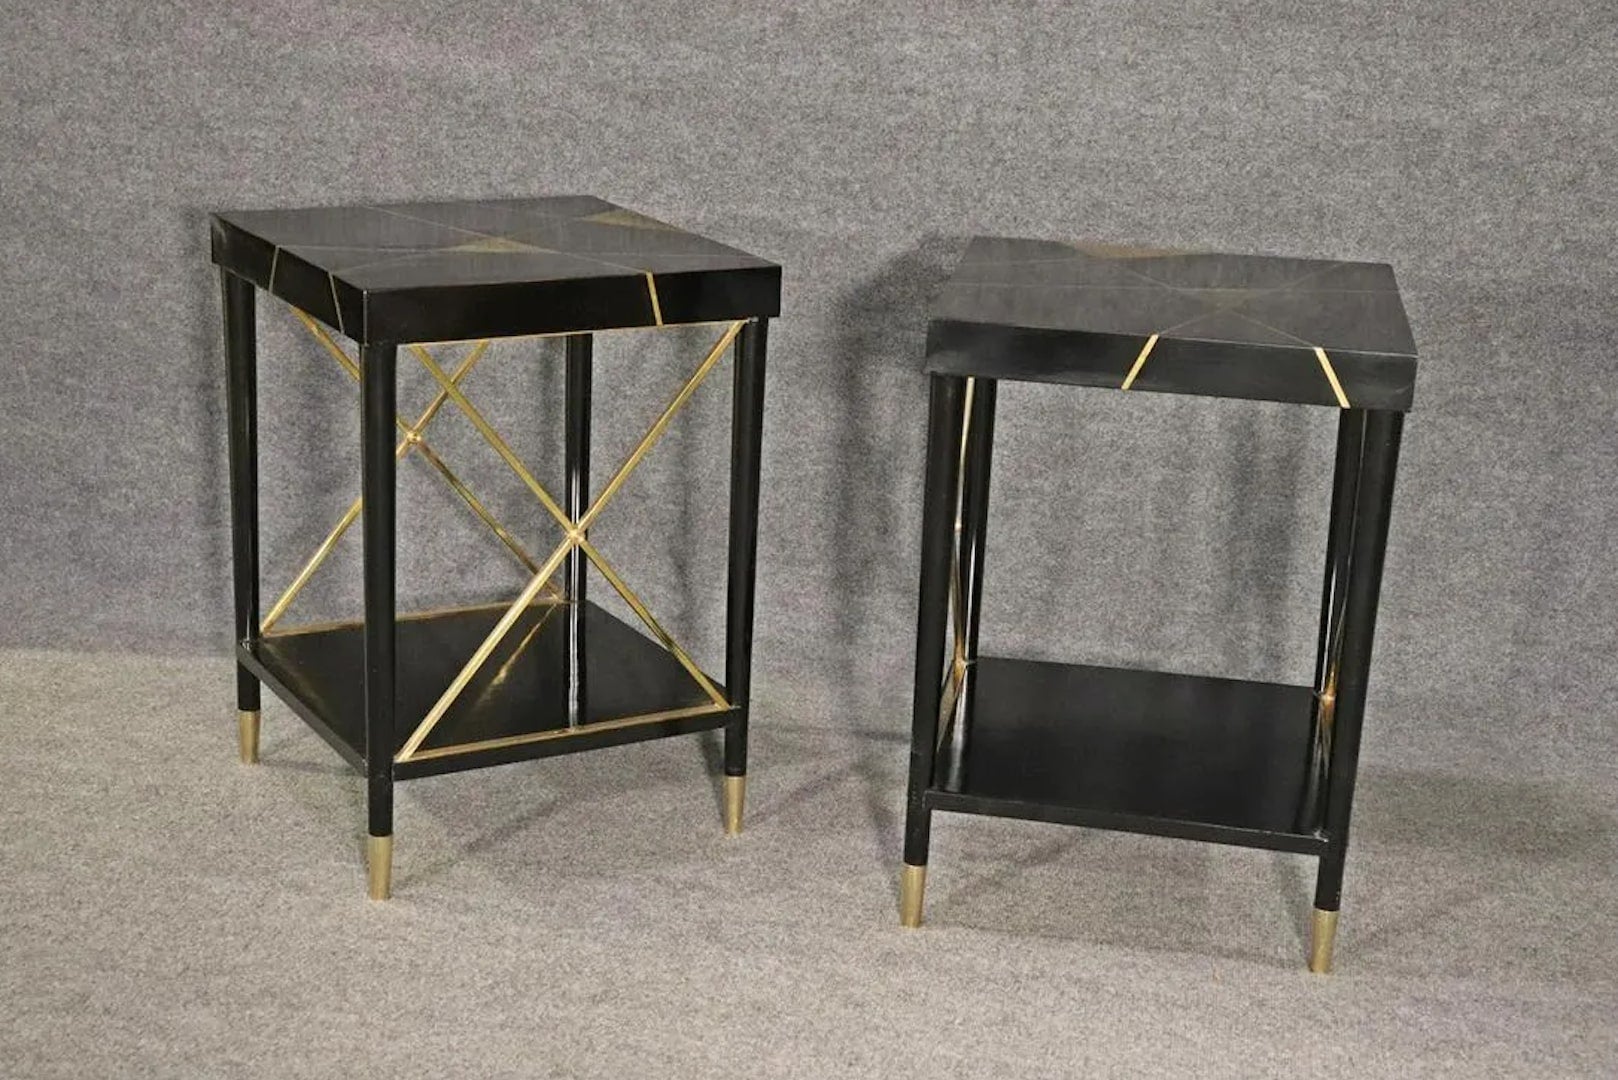 Pair of side tables in black ebonized wood with brass inlay accents. 
Please confirm location.